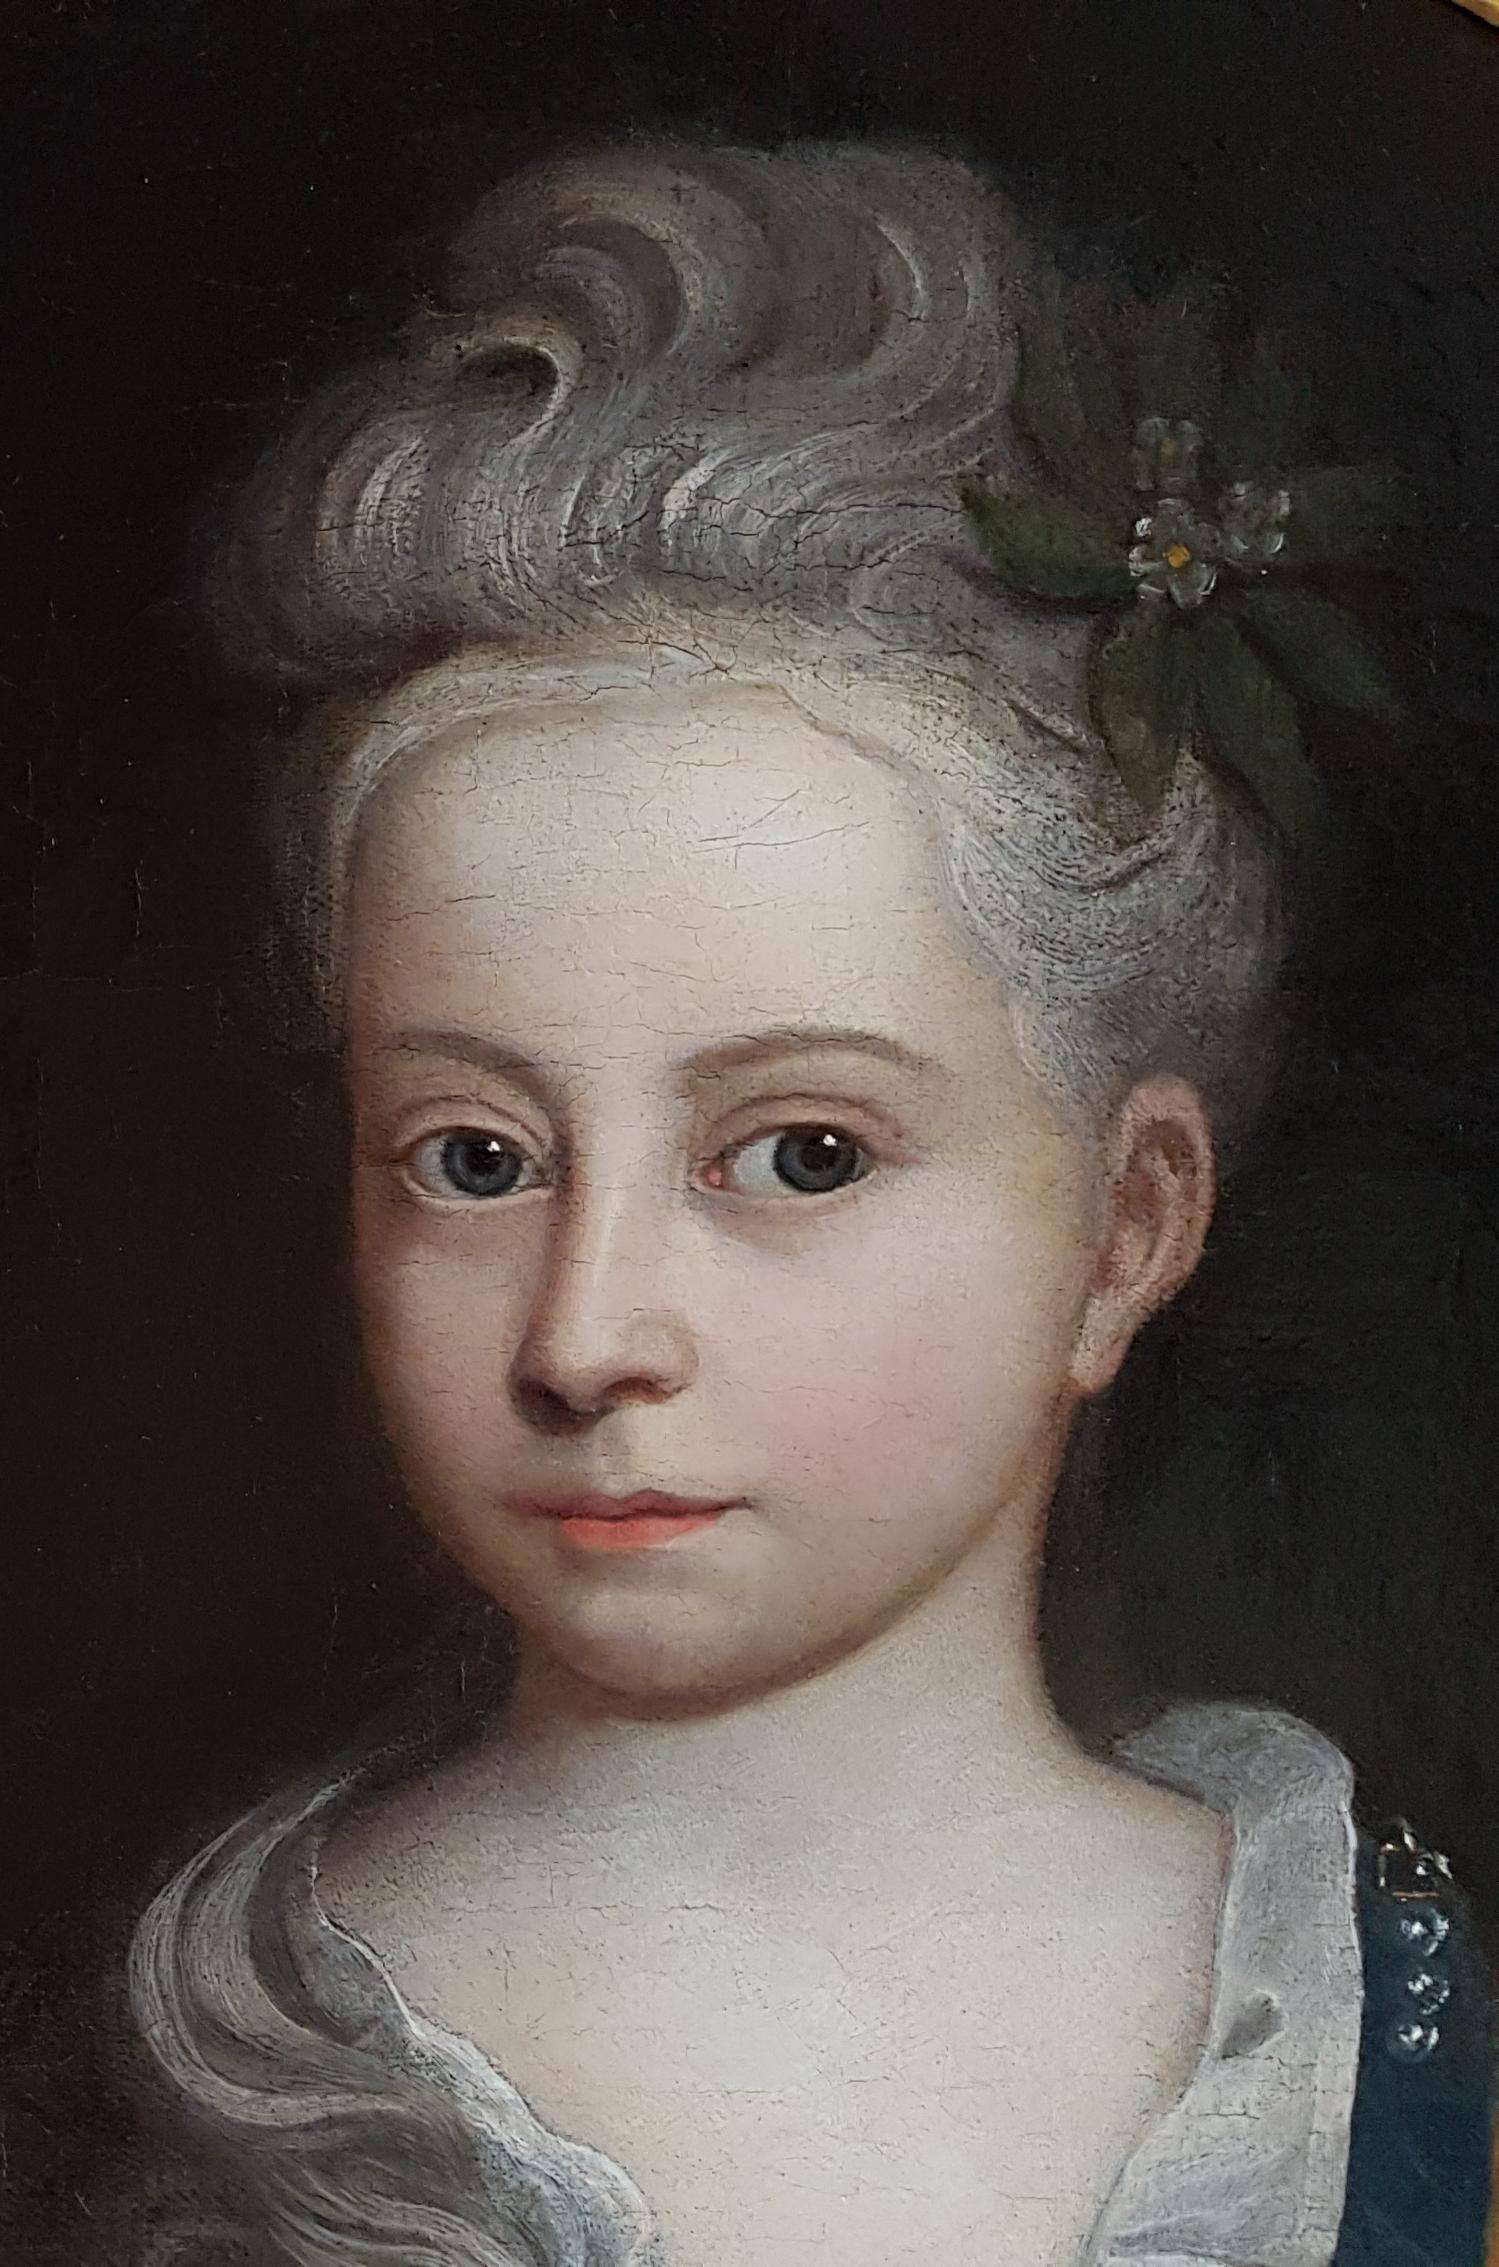 Portrait of a Young Girl - Black Portrait Painting by Circle of Jean-Baptiste van Loo (1684-1745)